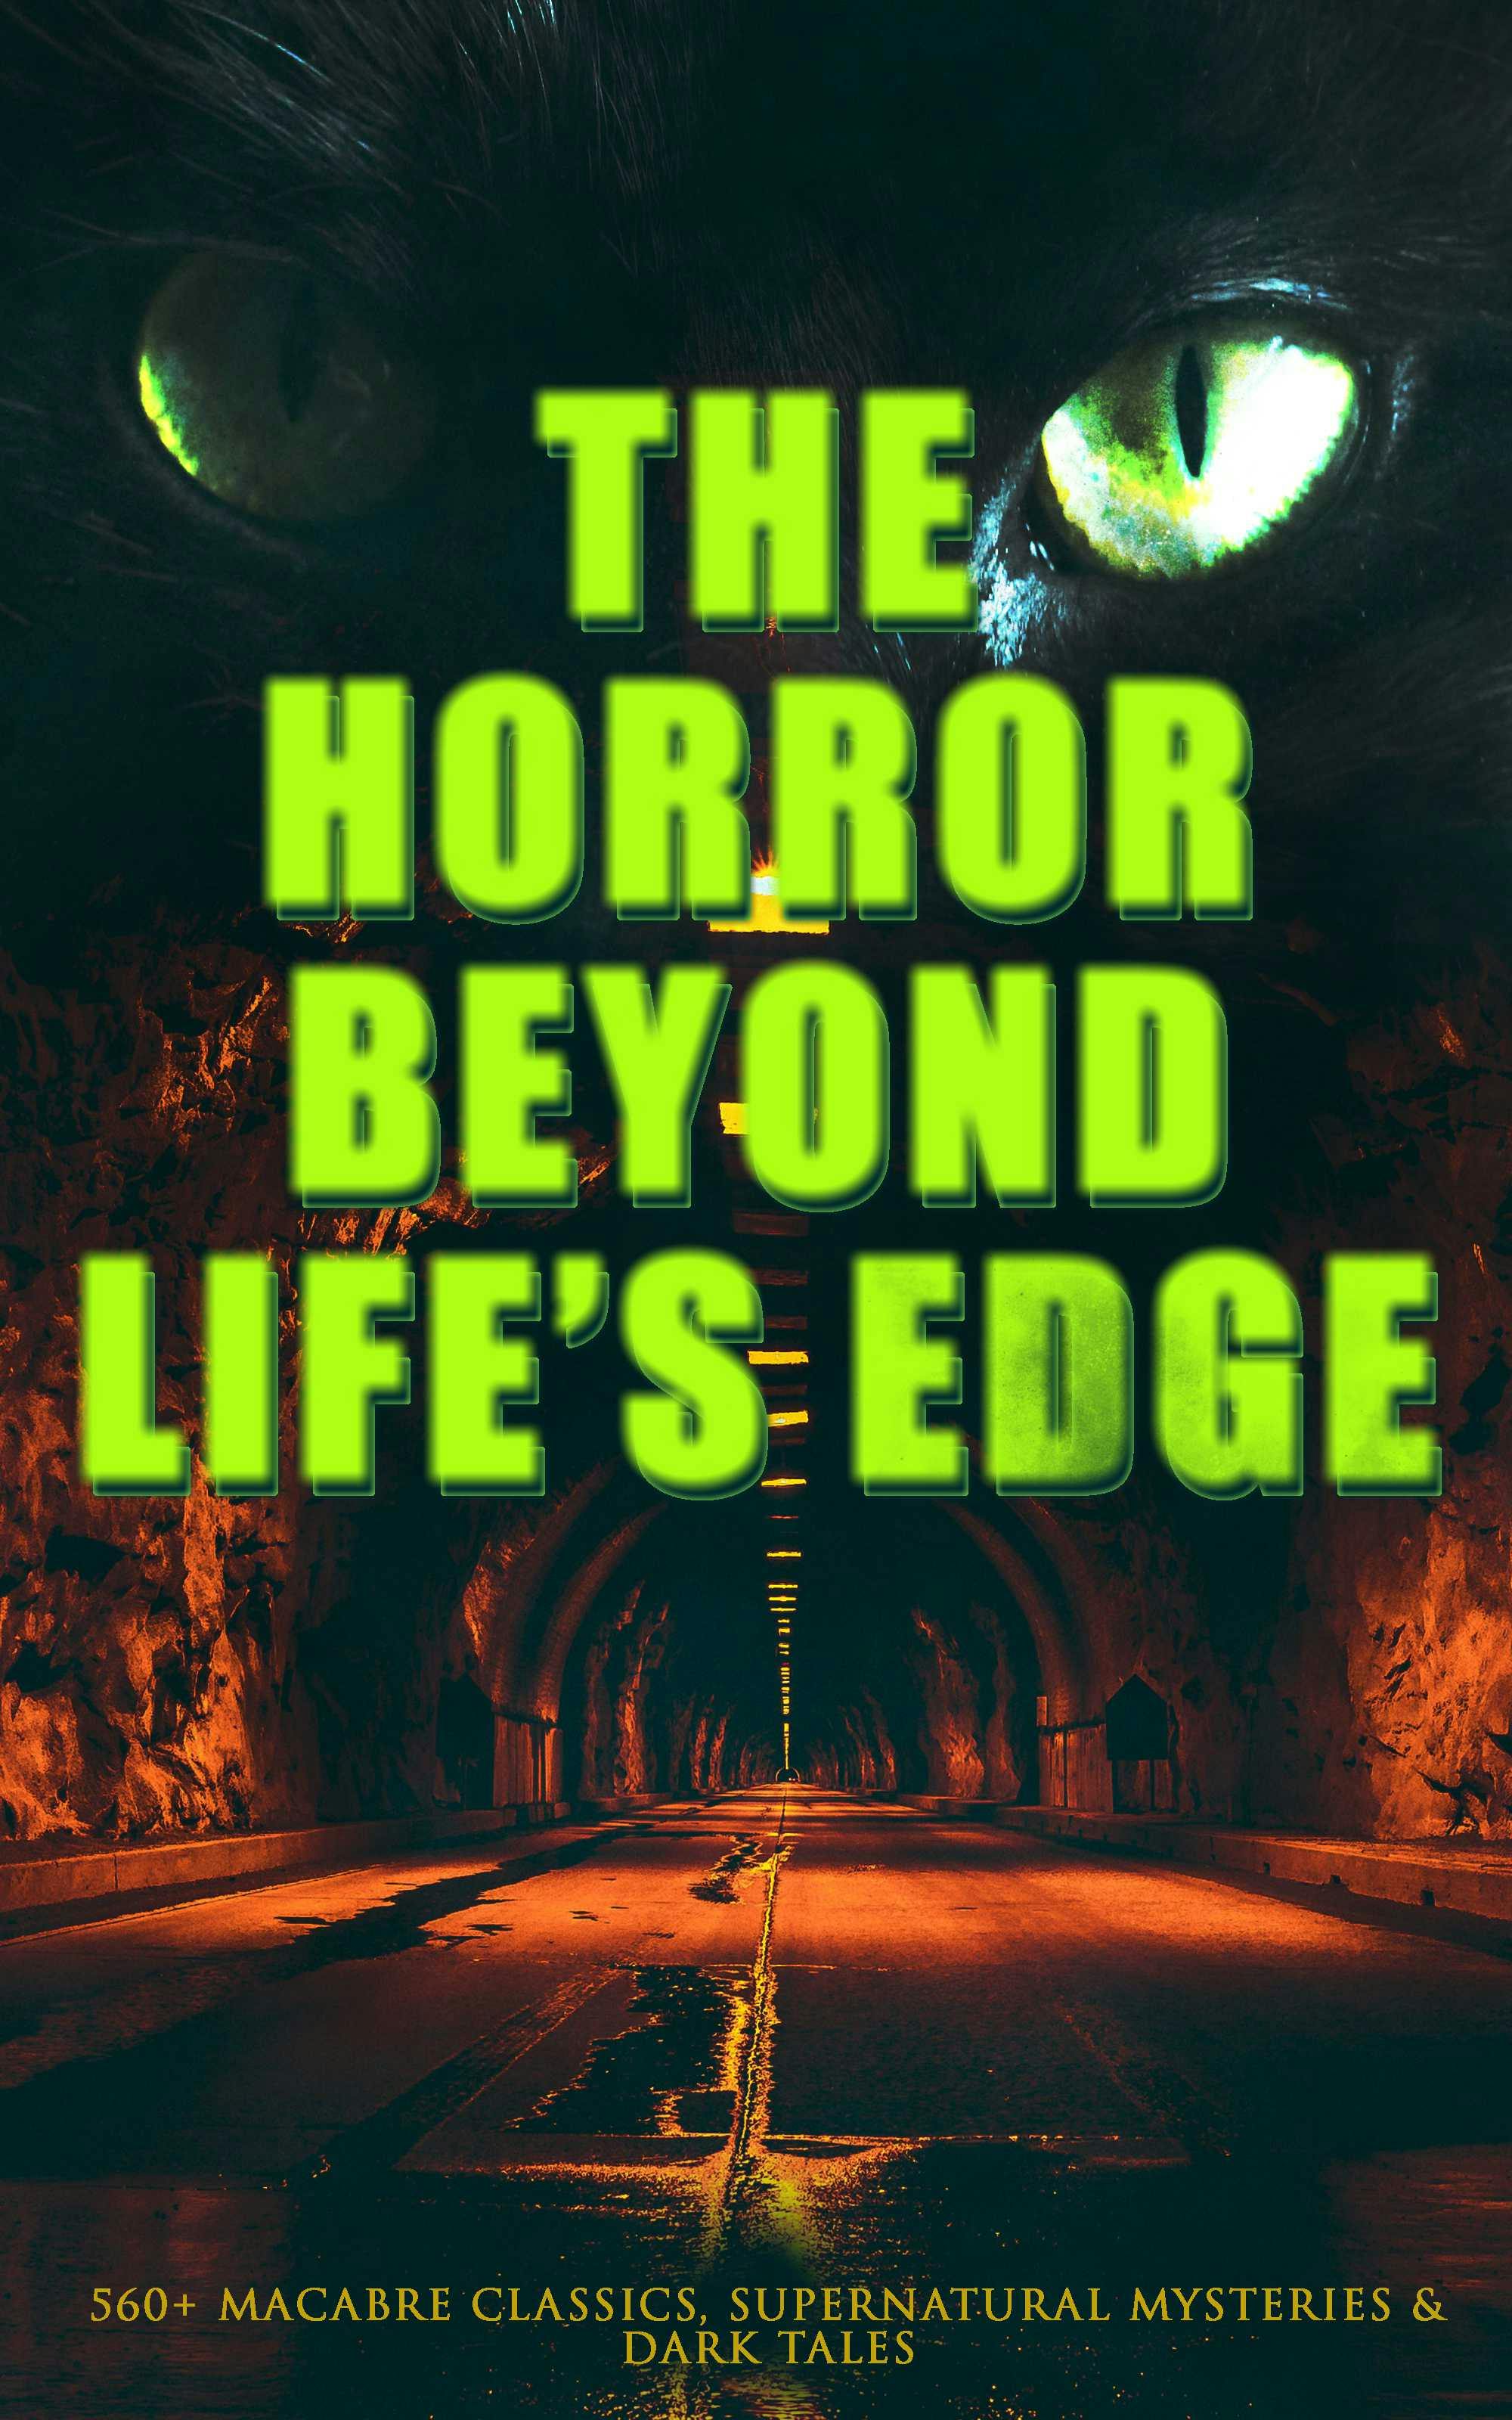 The Horror Beyond Life's Edge: 560+ Macabre Classics, Supernatural Mysteries & Dark Tales: The Mark of the Beast, Shapes in the Fire, A Ghost, The Man-Wolf, The Phantom Coach, The Vampyre, Sweeney Todd, The Sleepy Hollow, The Premature Burial, The Picture of Dorian Gray, The Ghost Pirates… - undefined